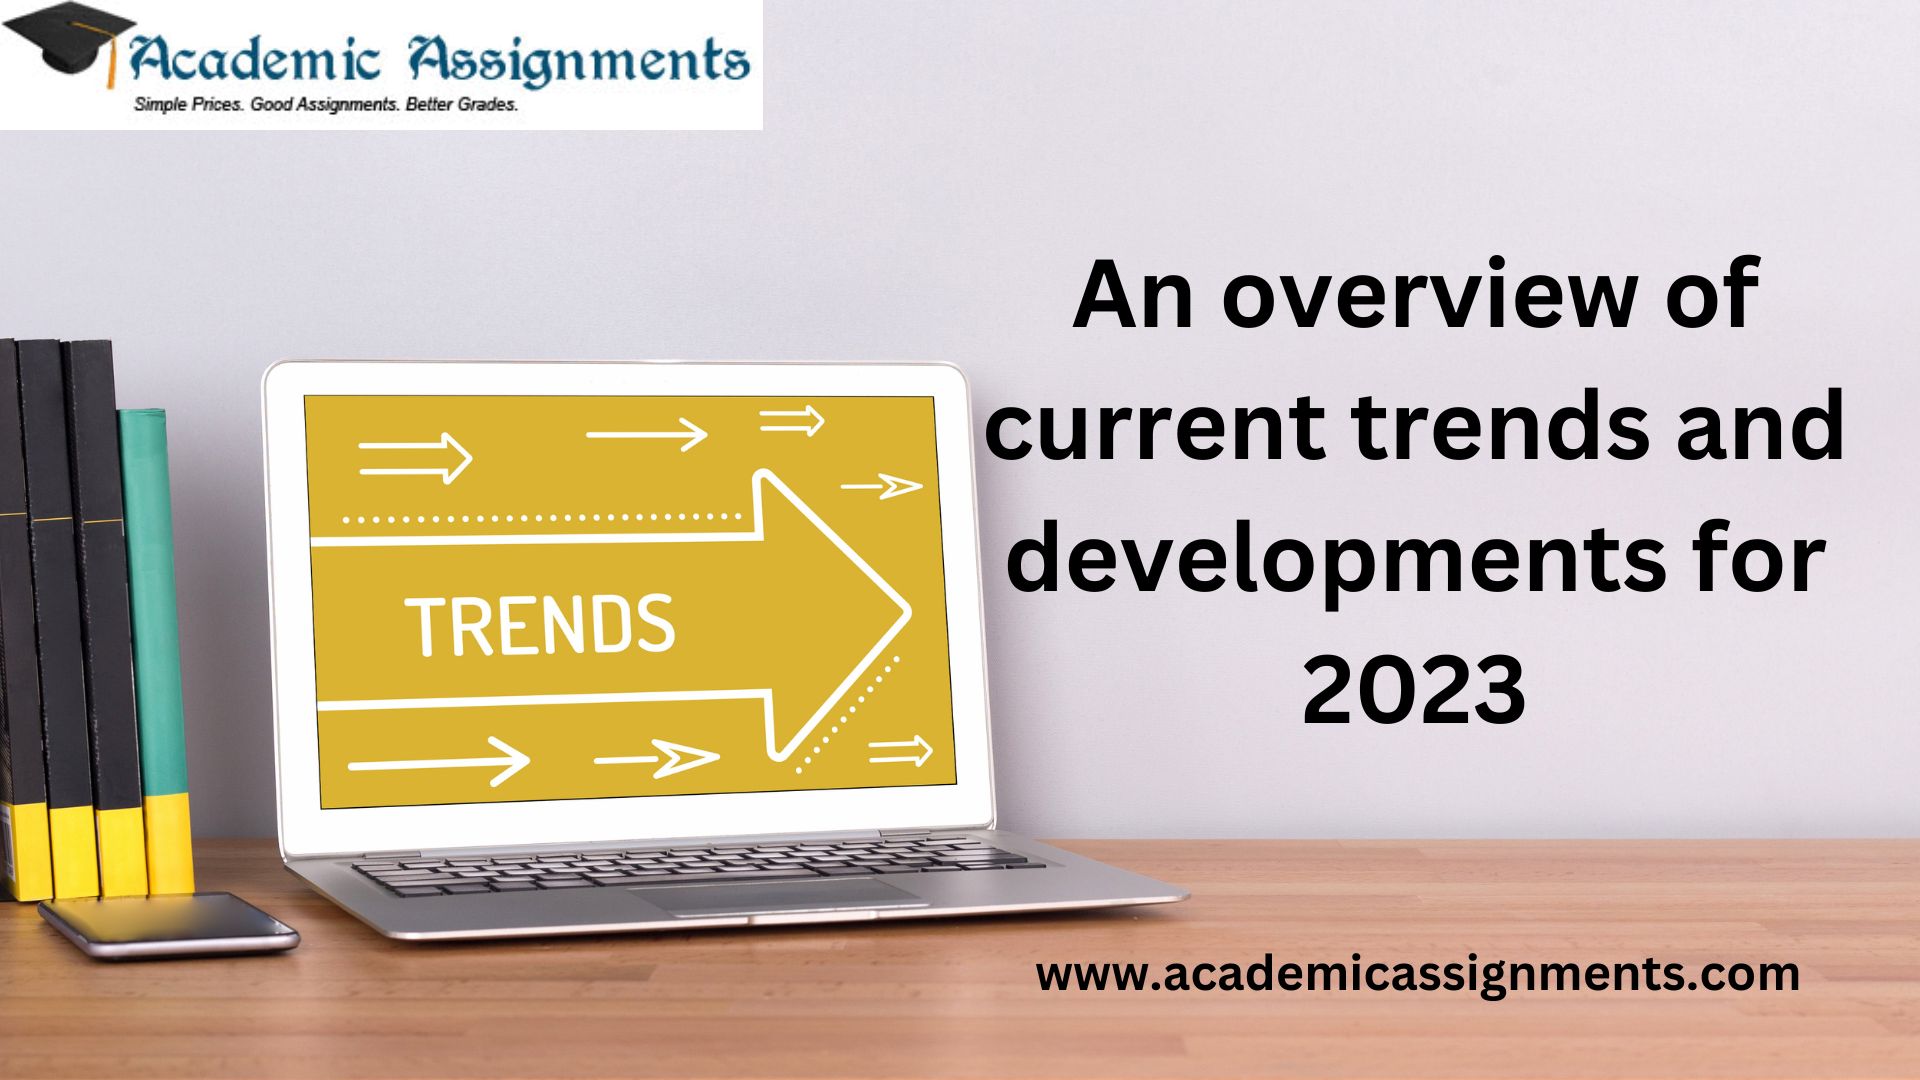 An overview of current trends and developments for 2023